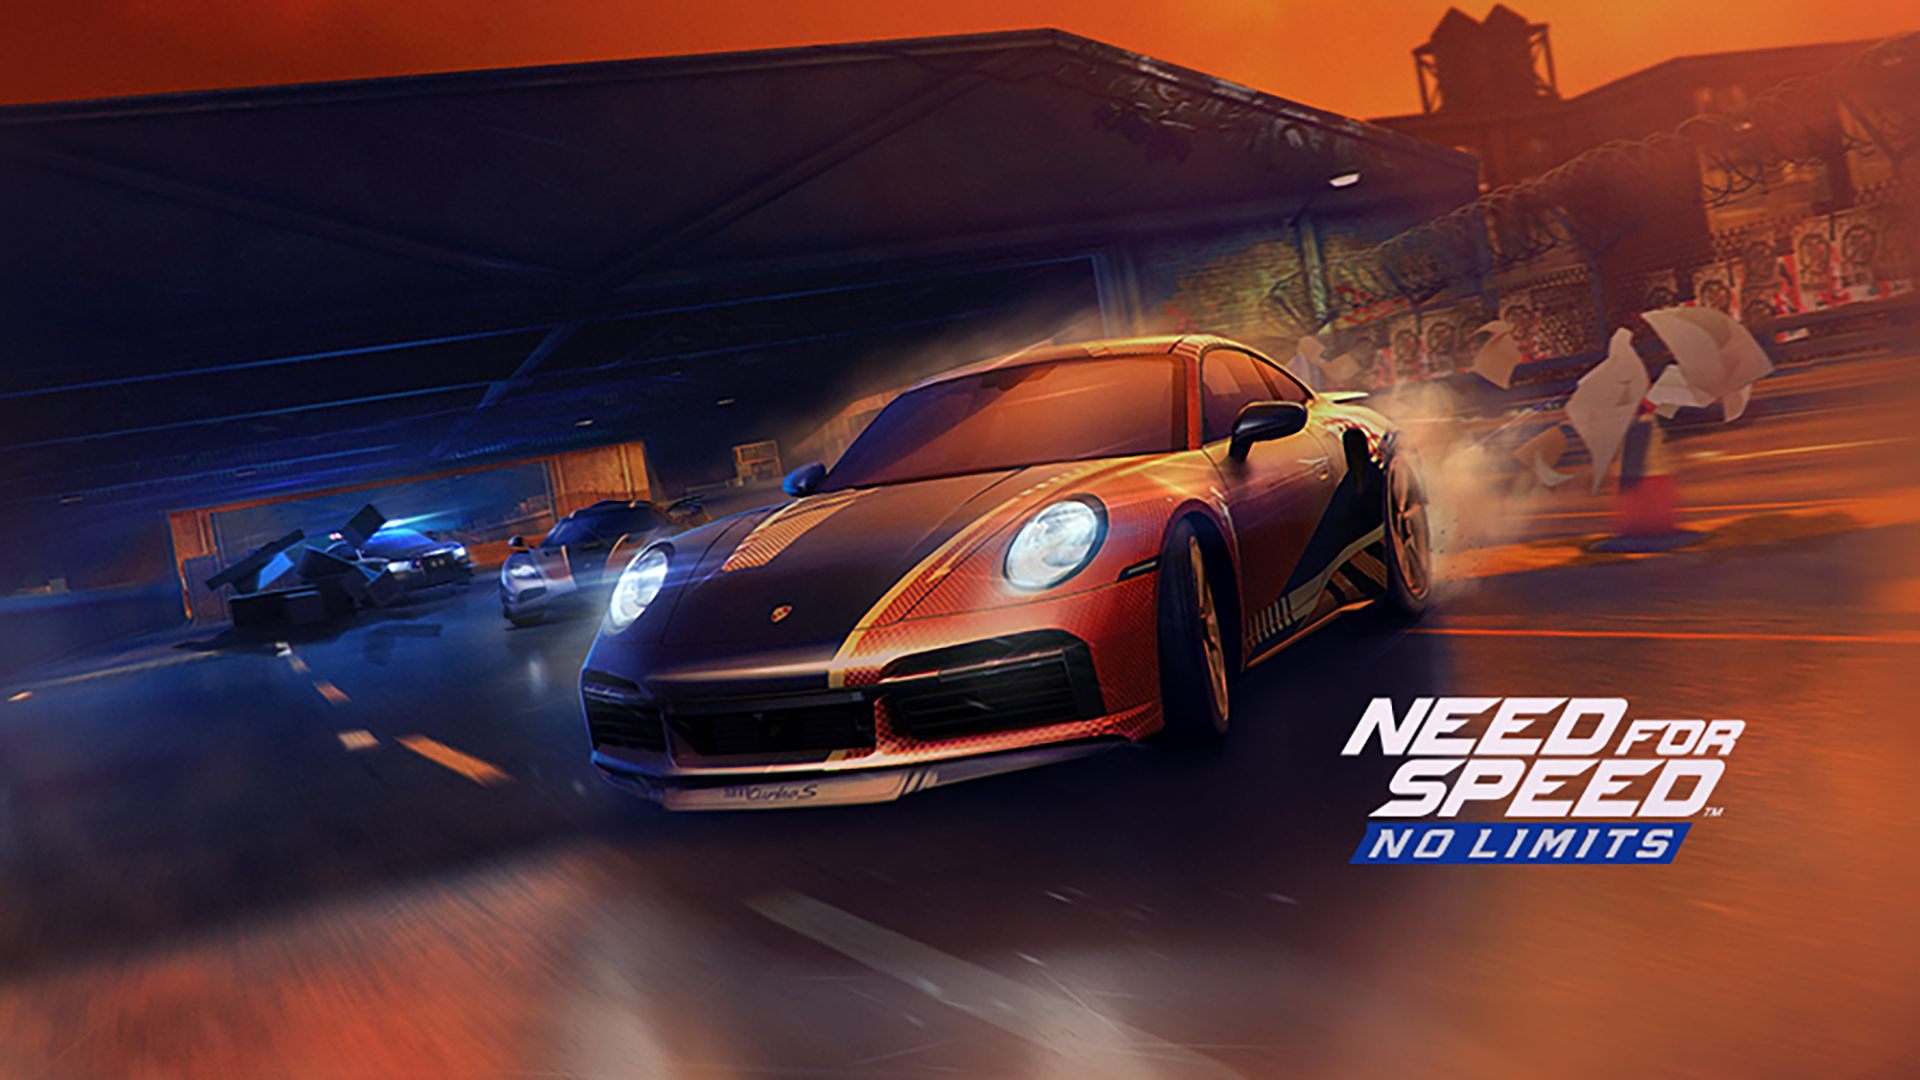 need for speed no limits pc